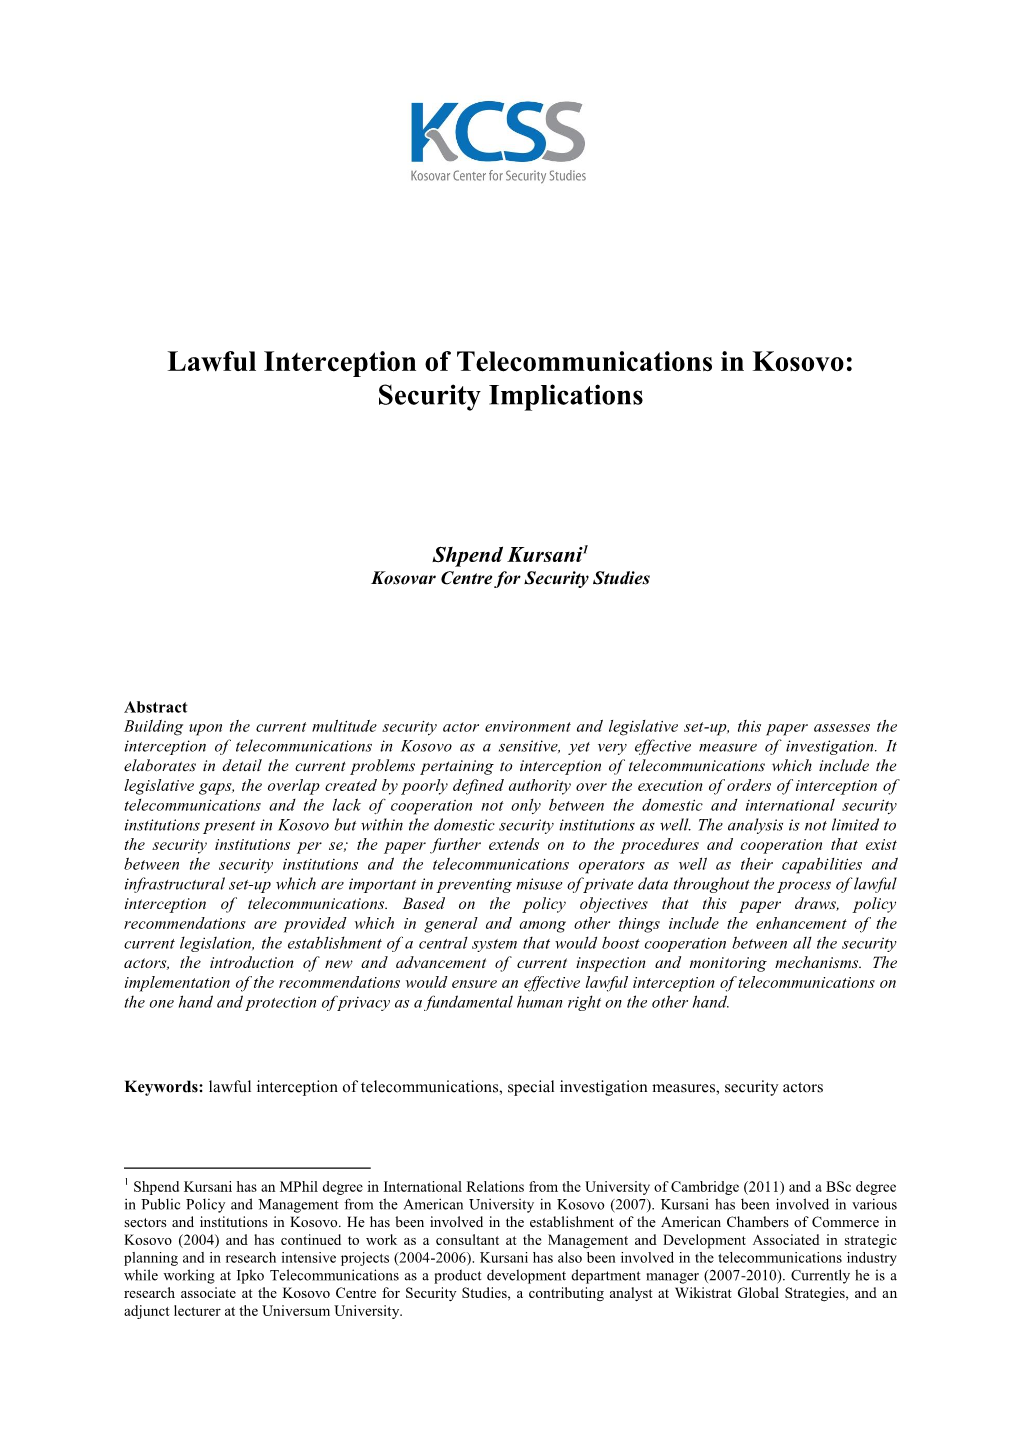 Lawful Interception of Telecommunications in Kosovo: Security Implications